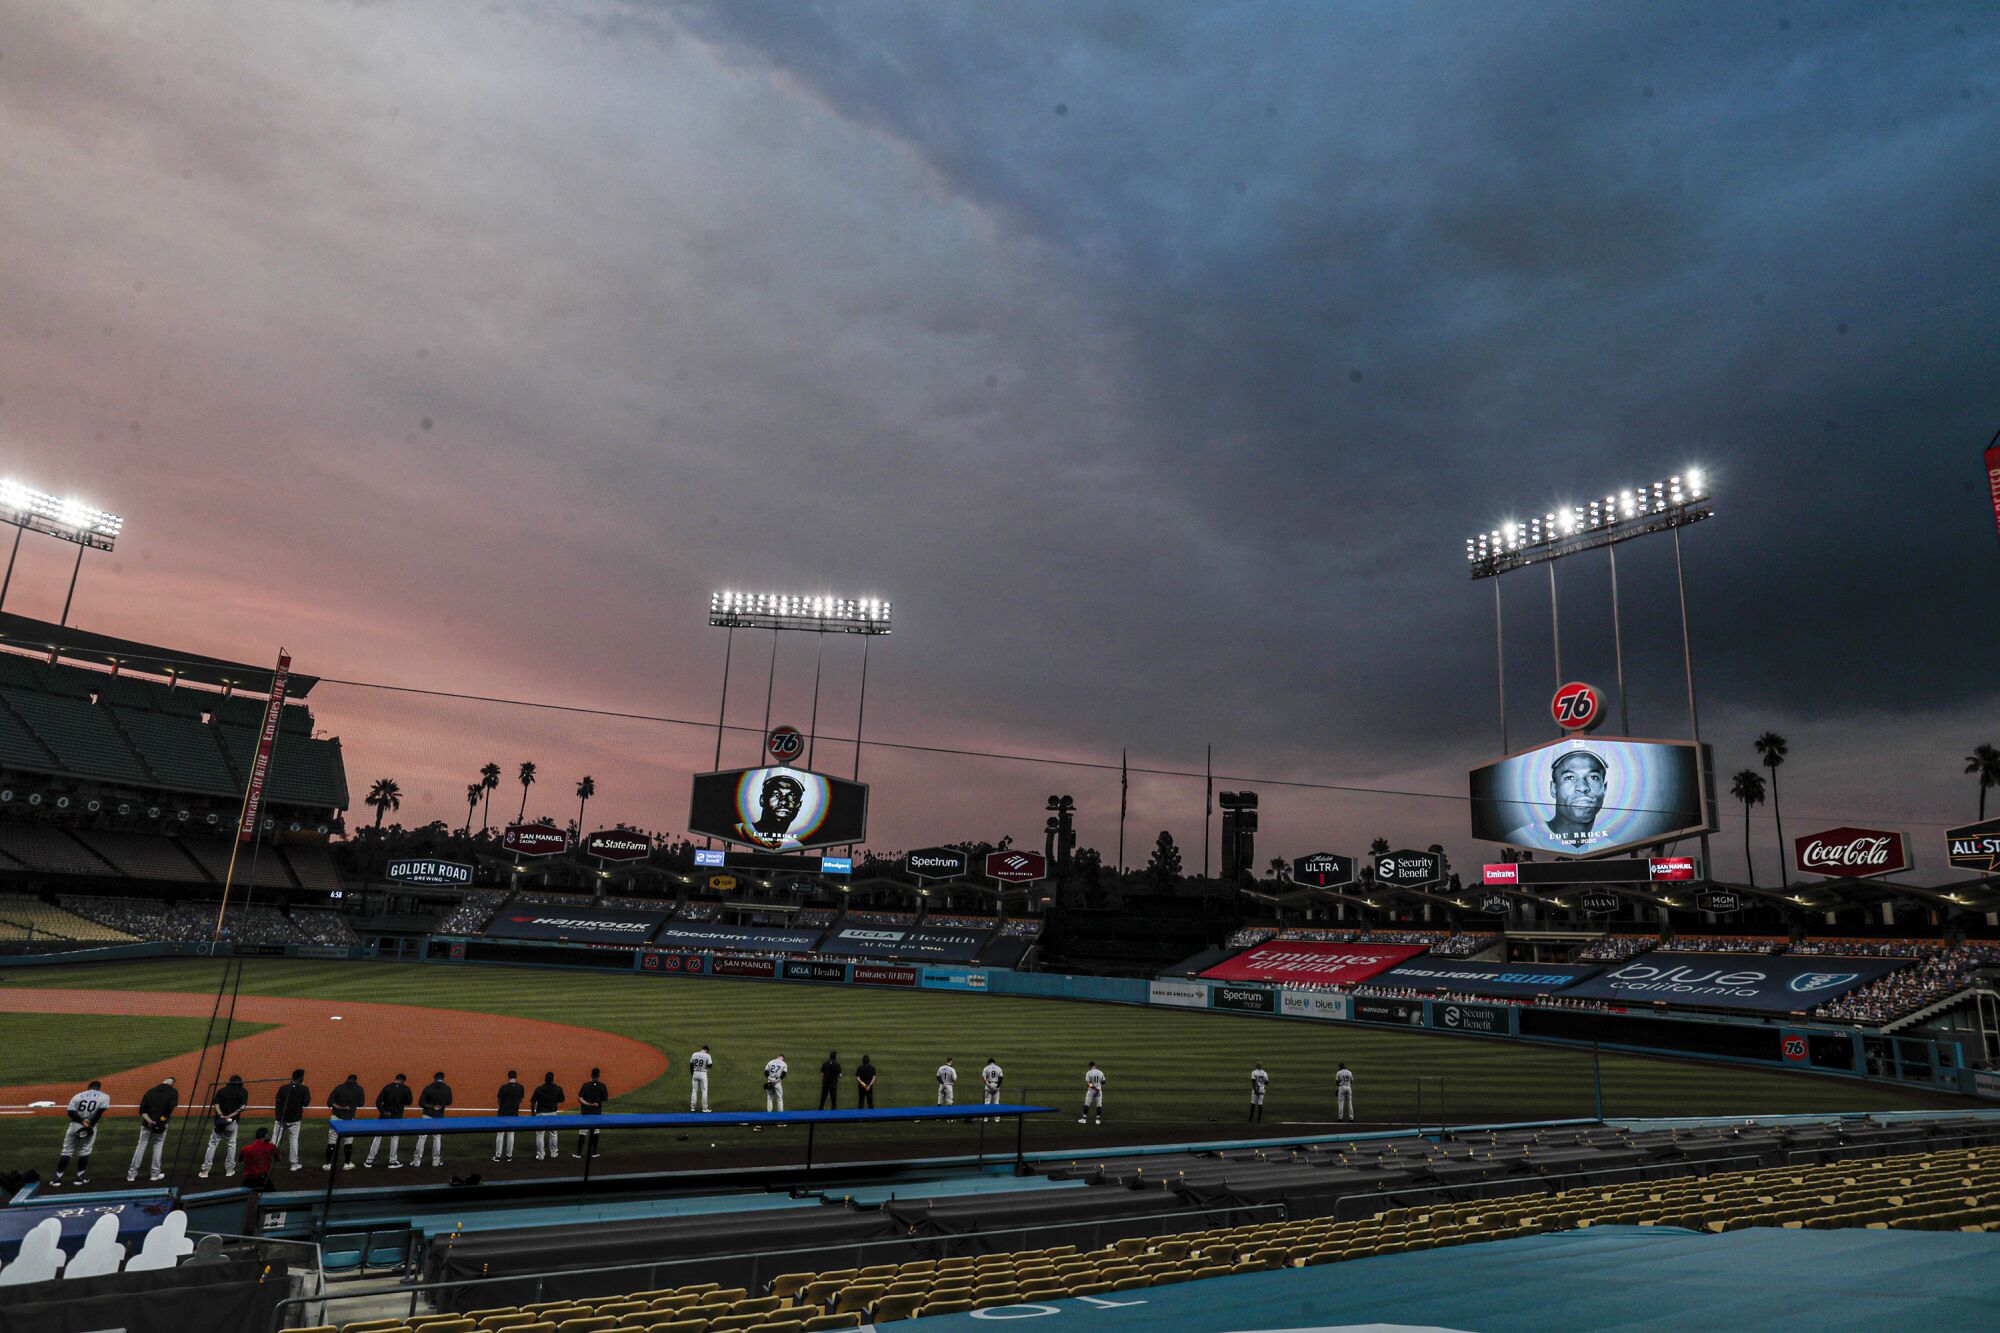 Smoke from two area fires fills the sunset sky before the Dodgers play the Rockies at Dodger Stadium.